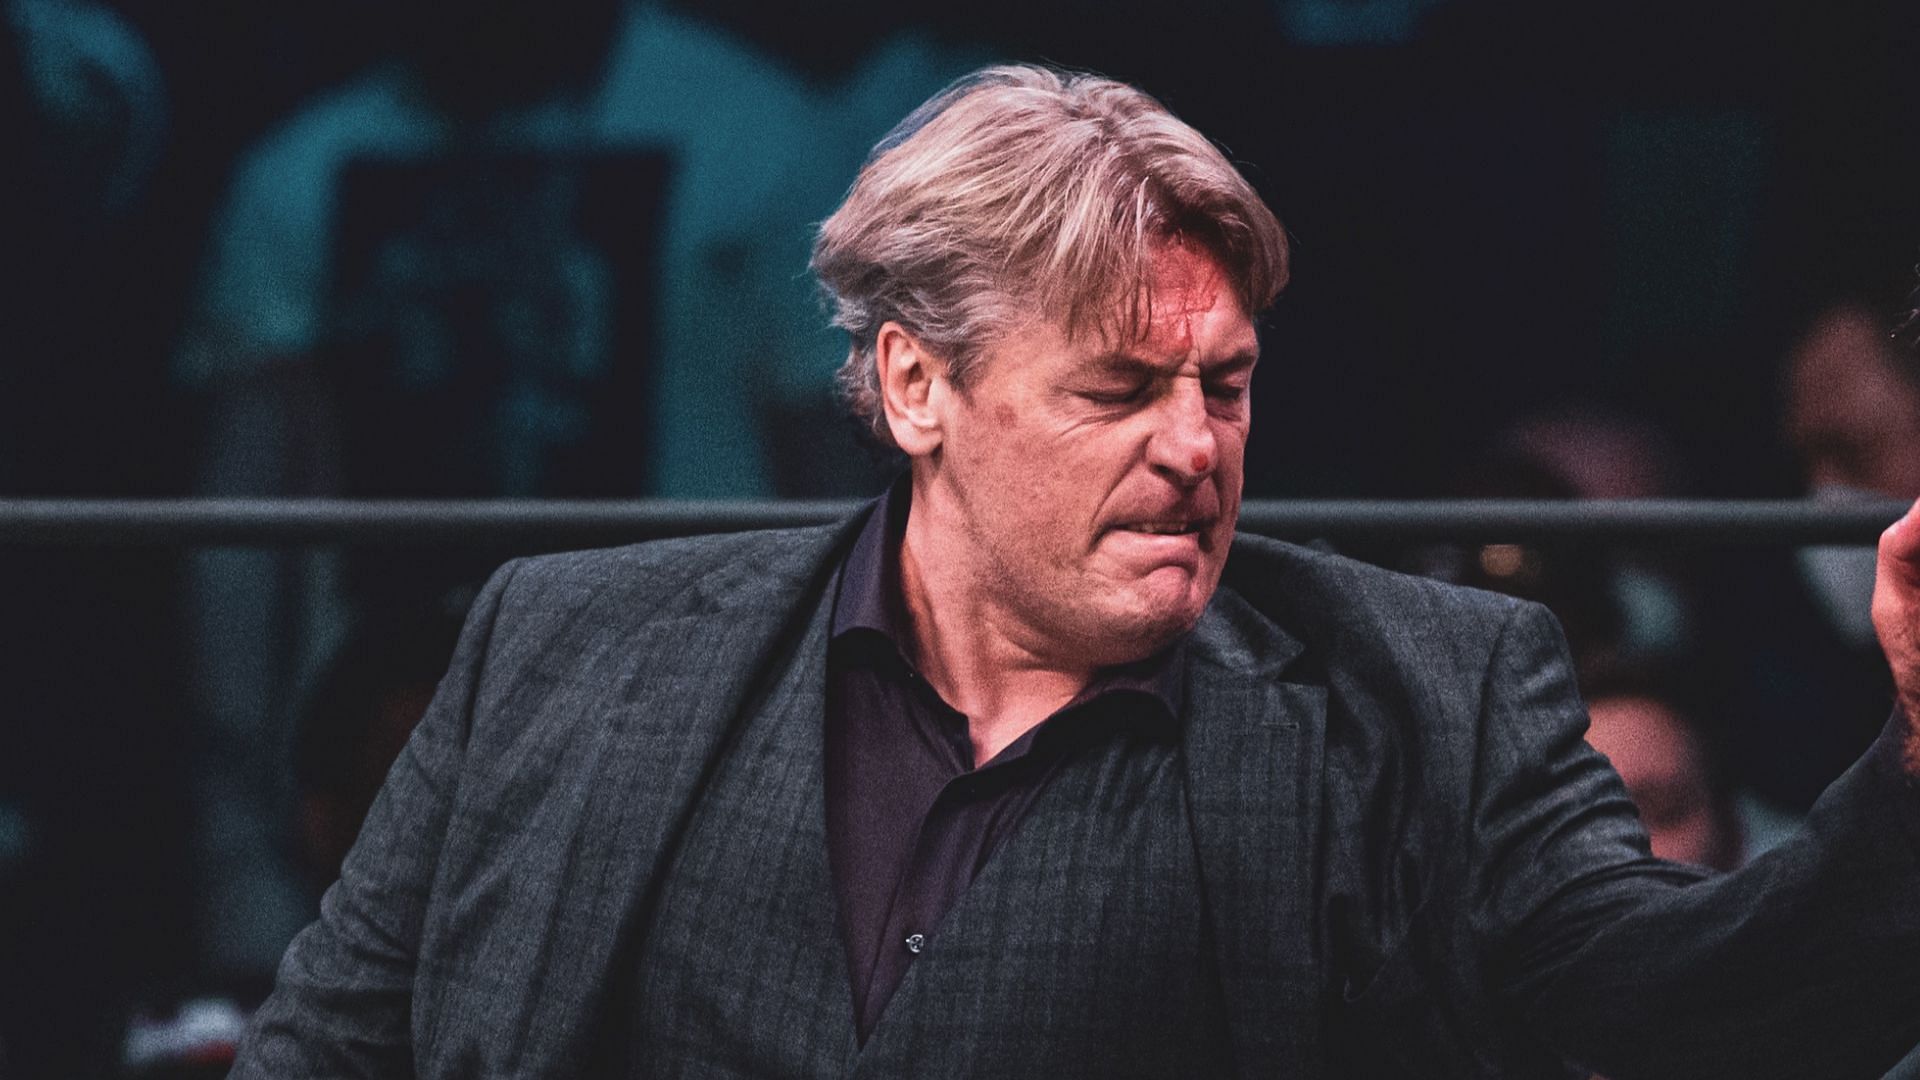 William Regal slapping Bryan Danielson at AEW Revolution 2022 (Credit: Jay Lee Photography)